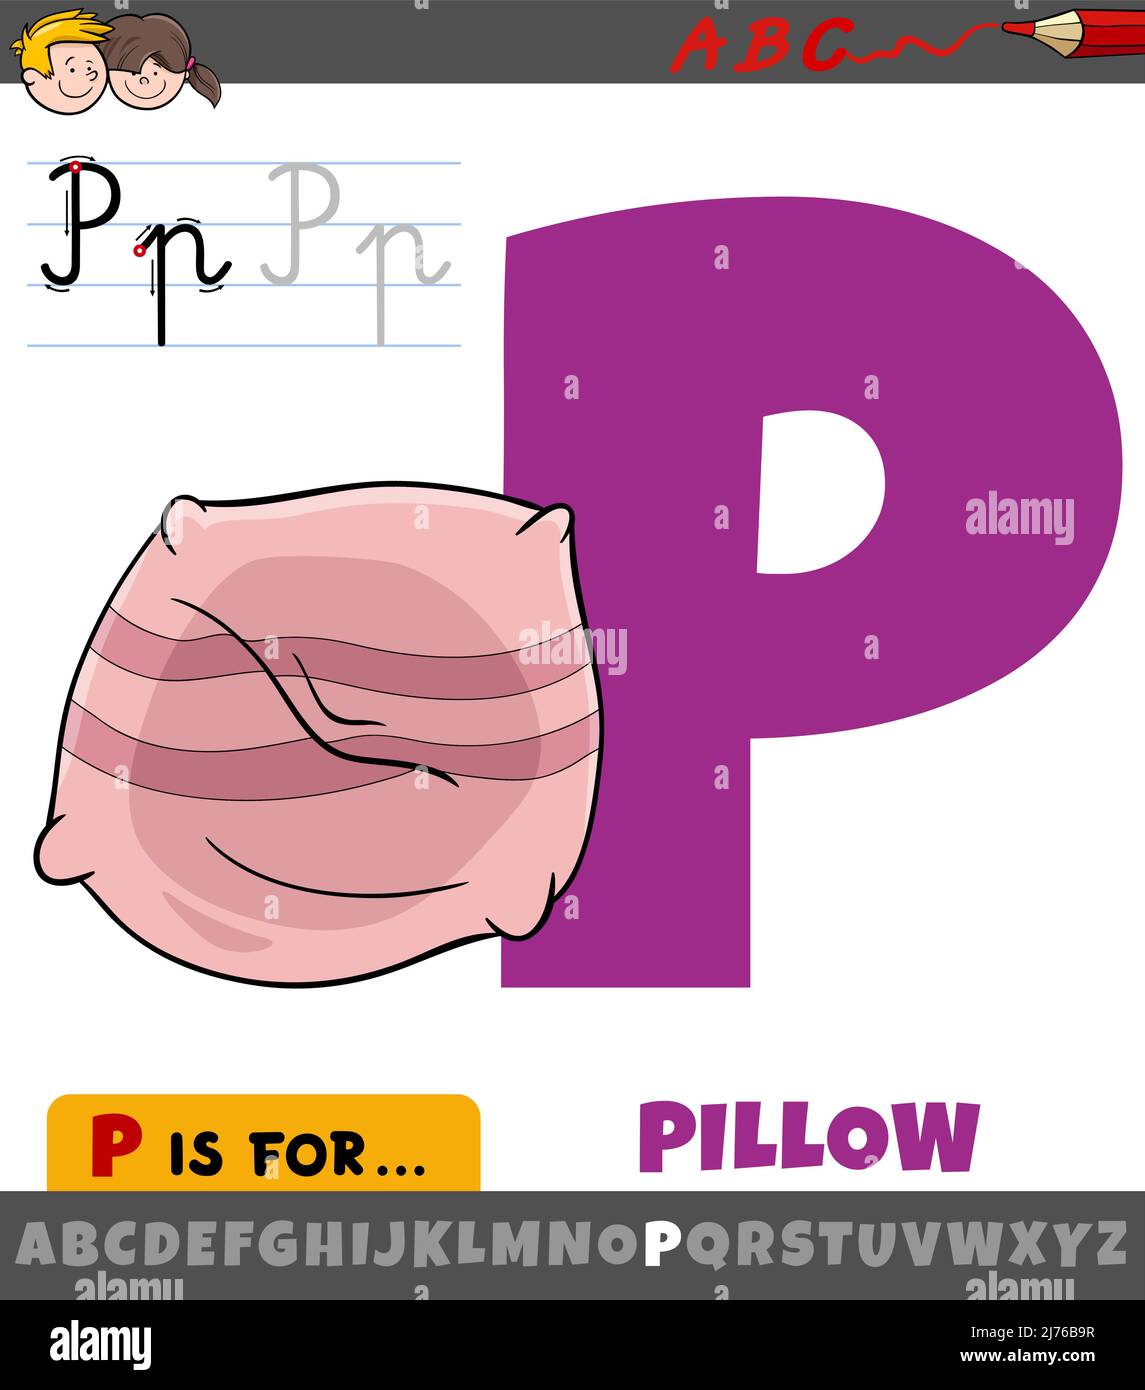 Educational cartoon illustration of letter P from alphabet with pillow object Stock Vector